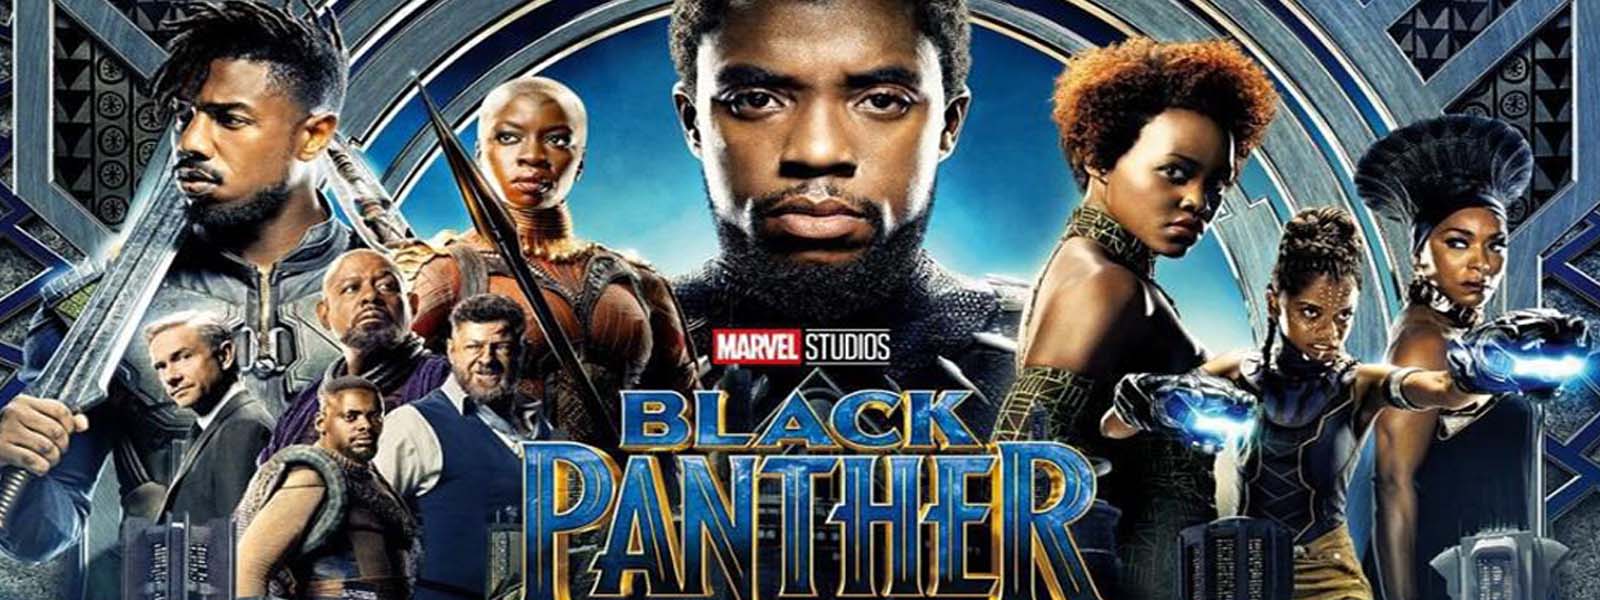 ‘Black Panther’ smashes Box Office records